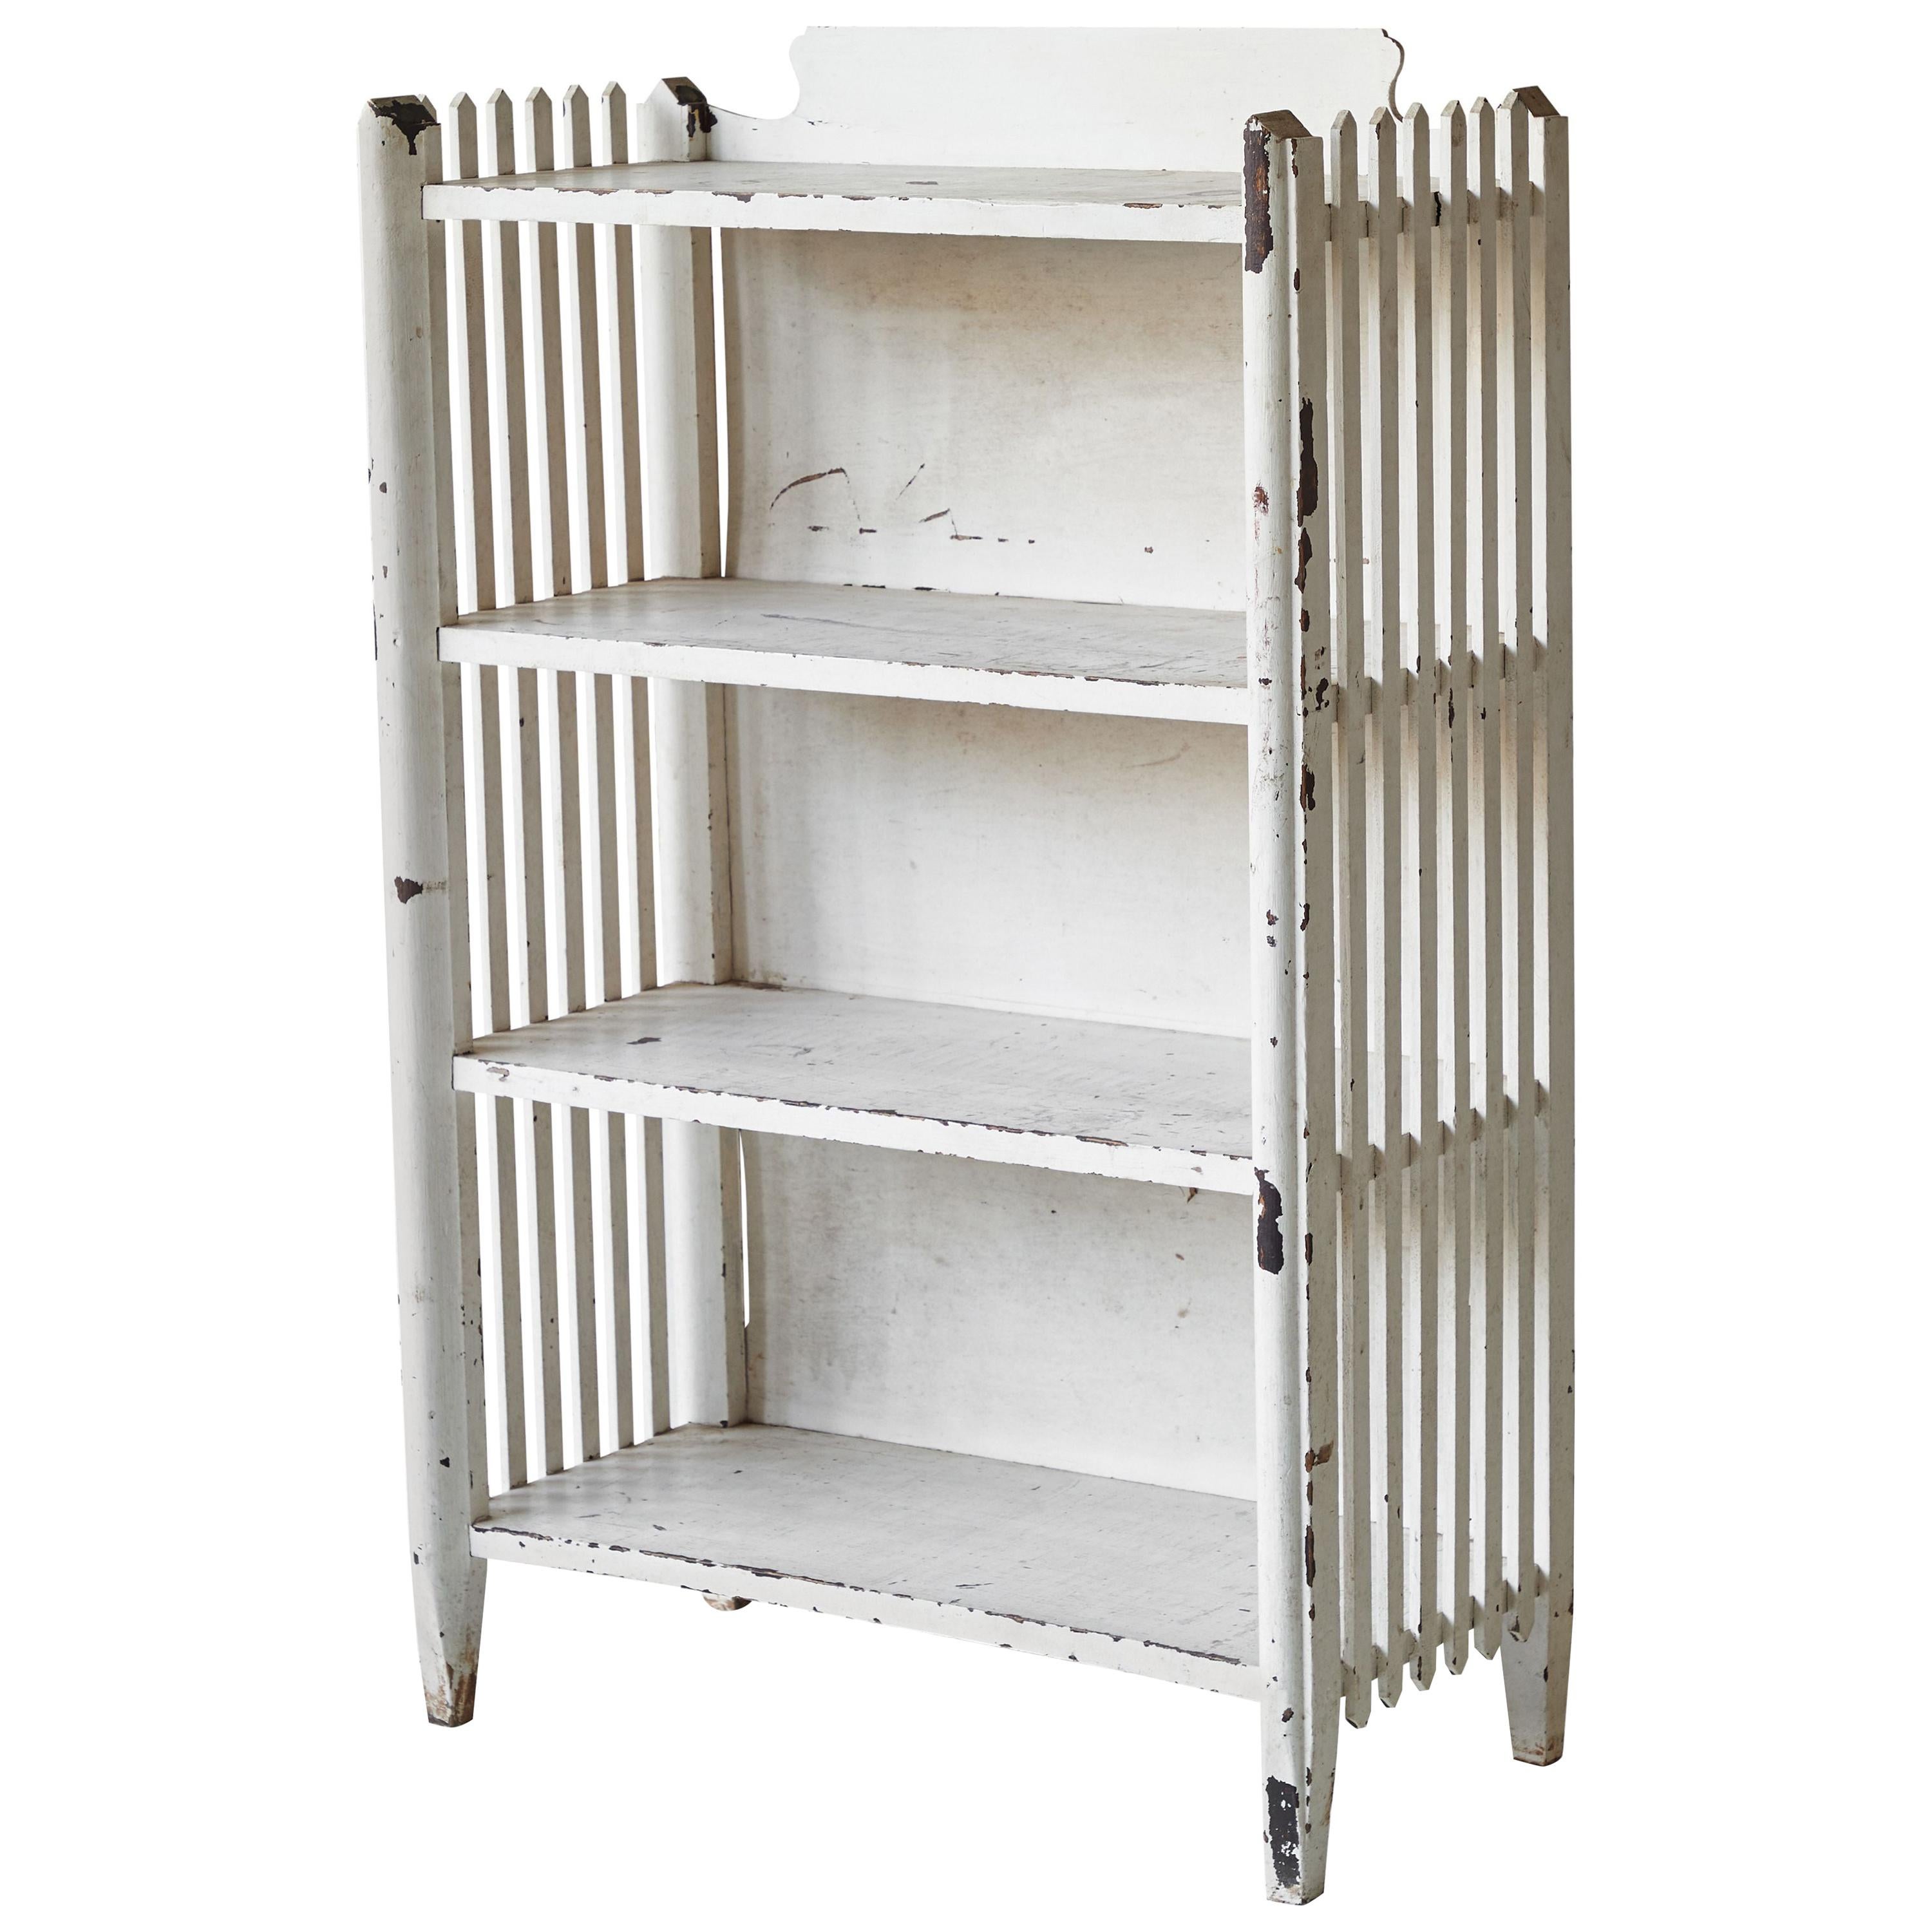 Early American White Painted Shelf